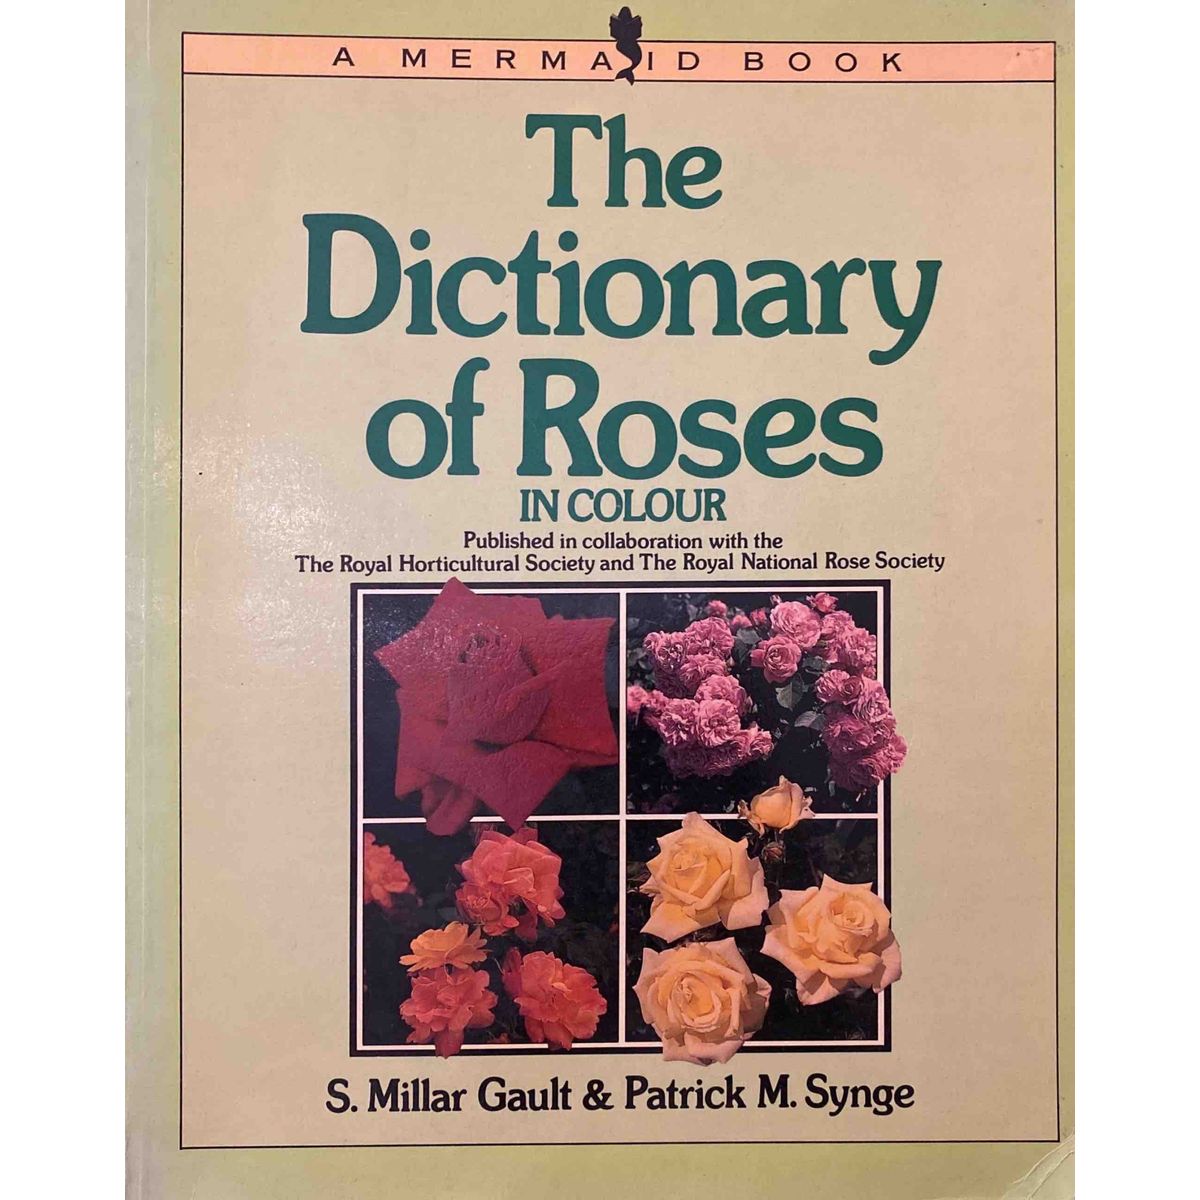 ISBN: 9780718121822 / 0718121821 - The Dictionary of Roses in Colour by S. Millar Gault & Patrick M. Synge [1989]